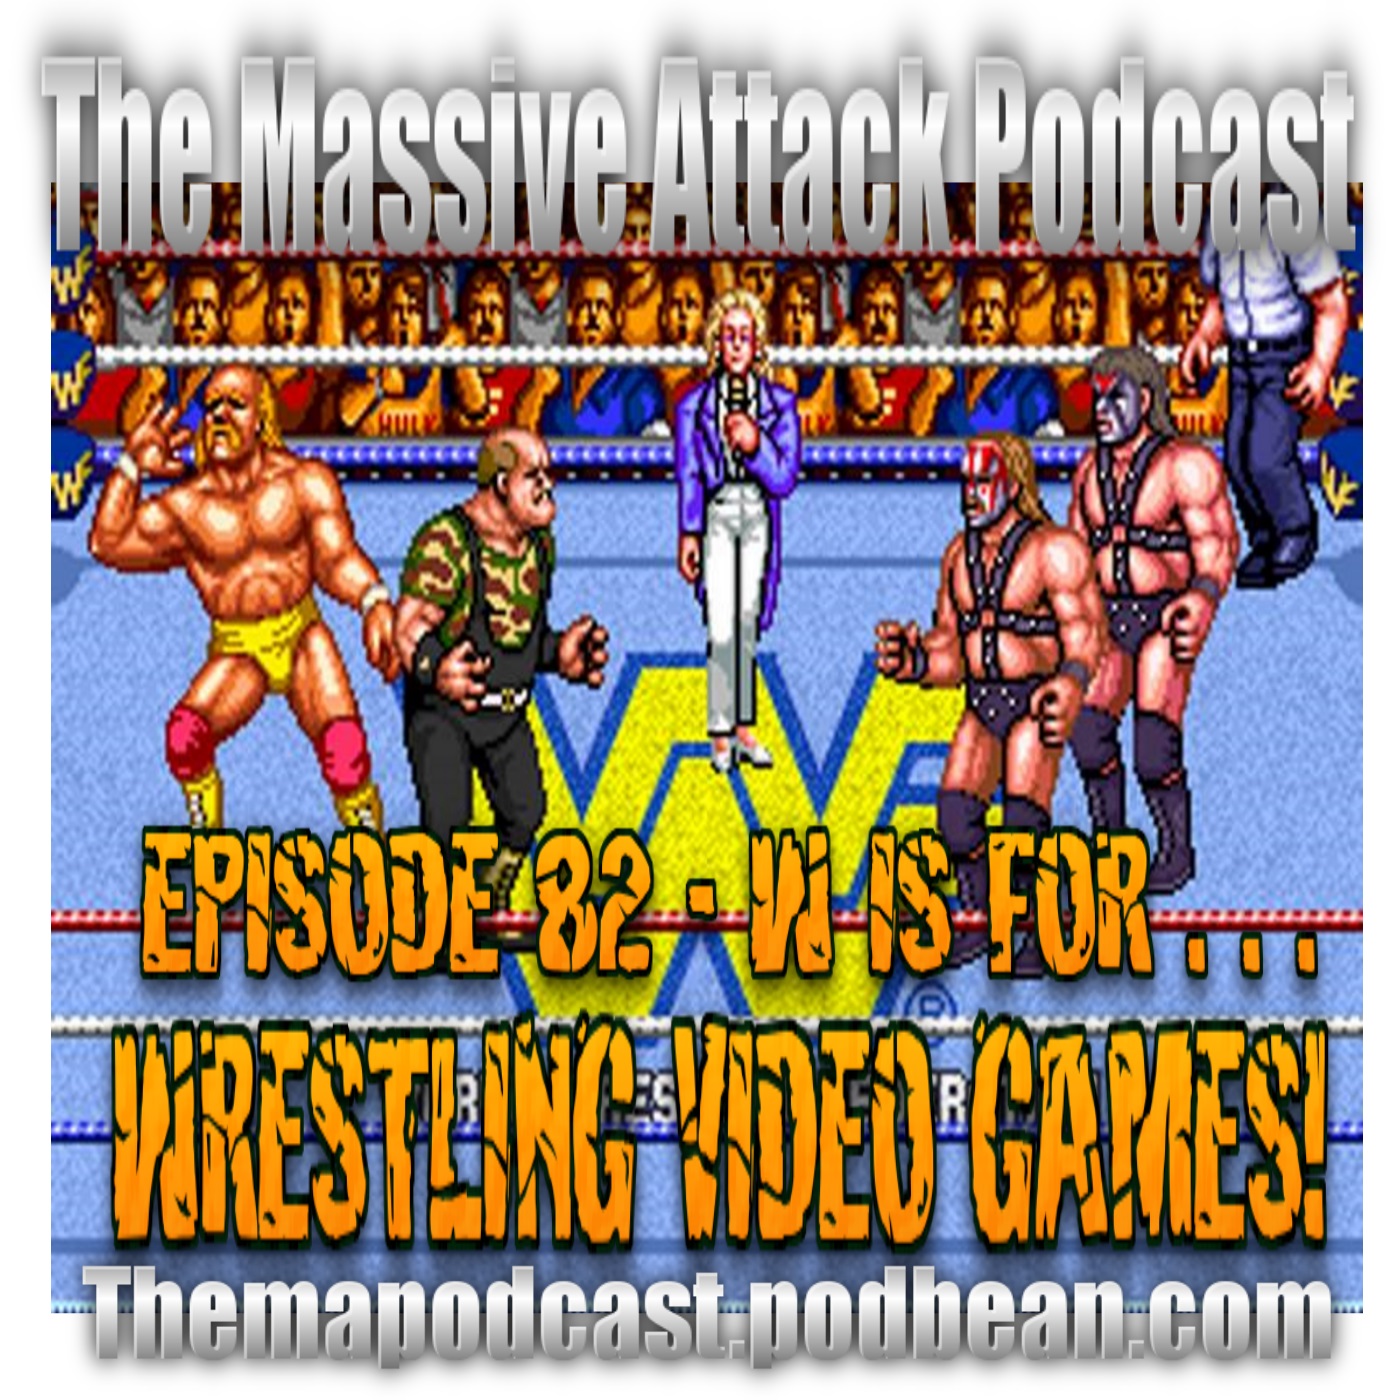 Episode 82 - W is for Wrestling Video Games!